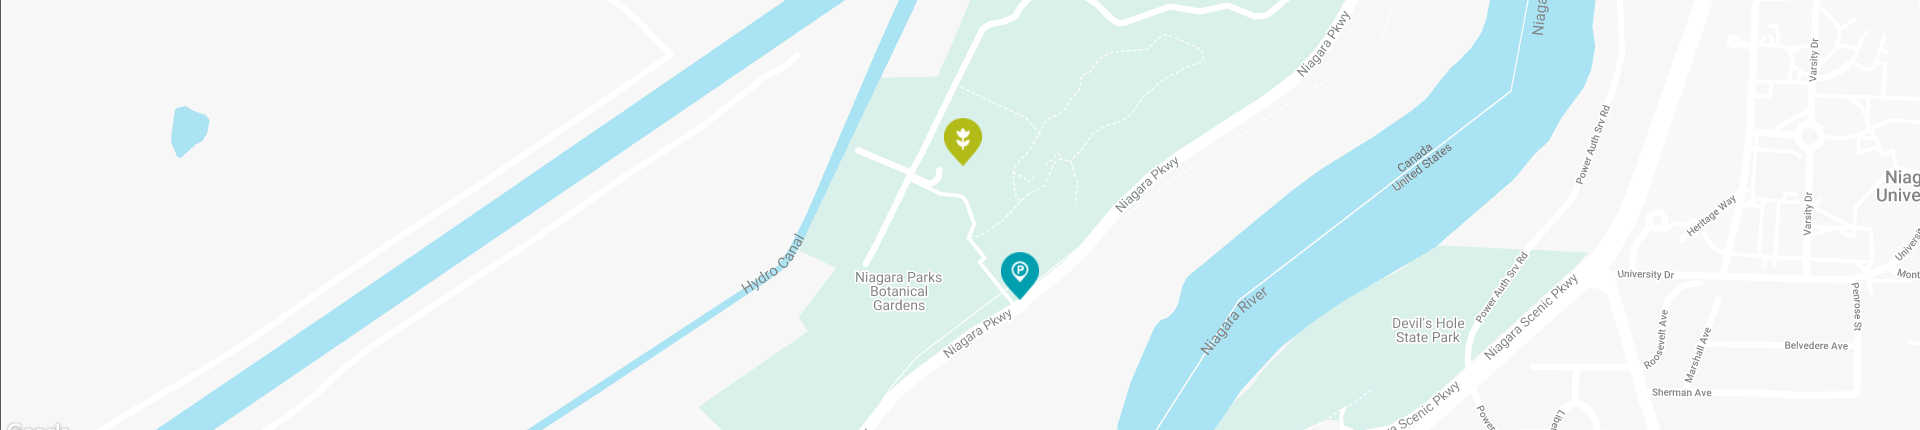 Map of location leading to an interactive map of Niagara Parks